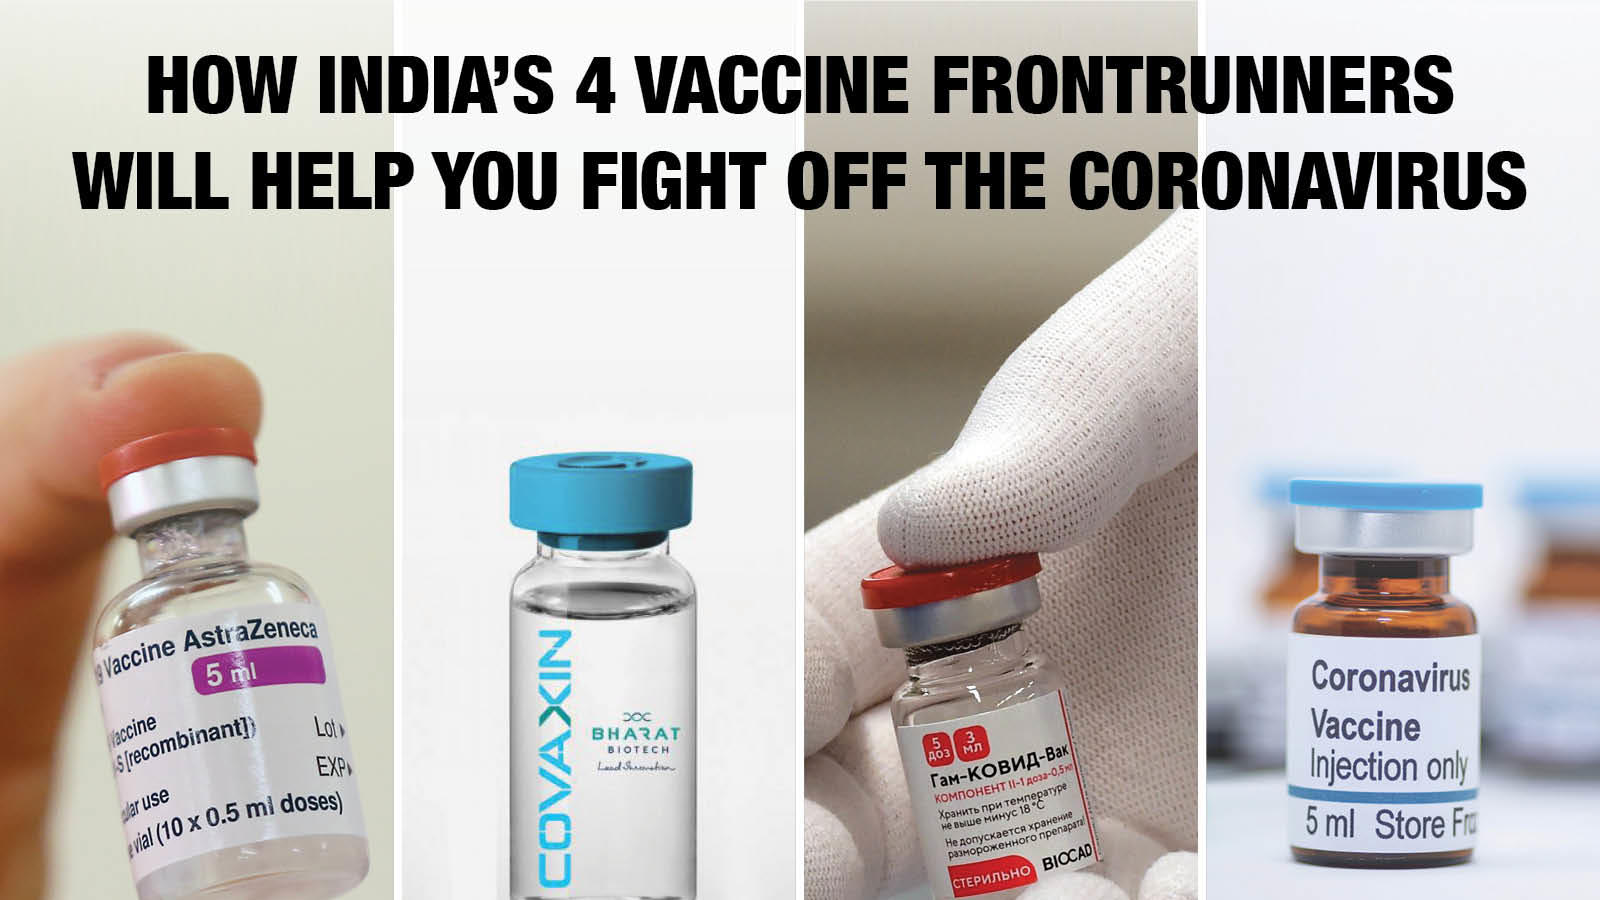 How India’s 4 vaccine frontrunners will help you fight off coronavirus